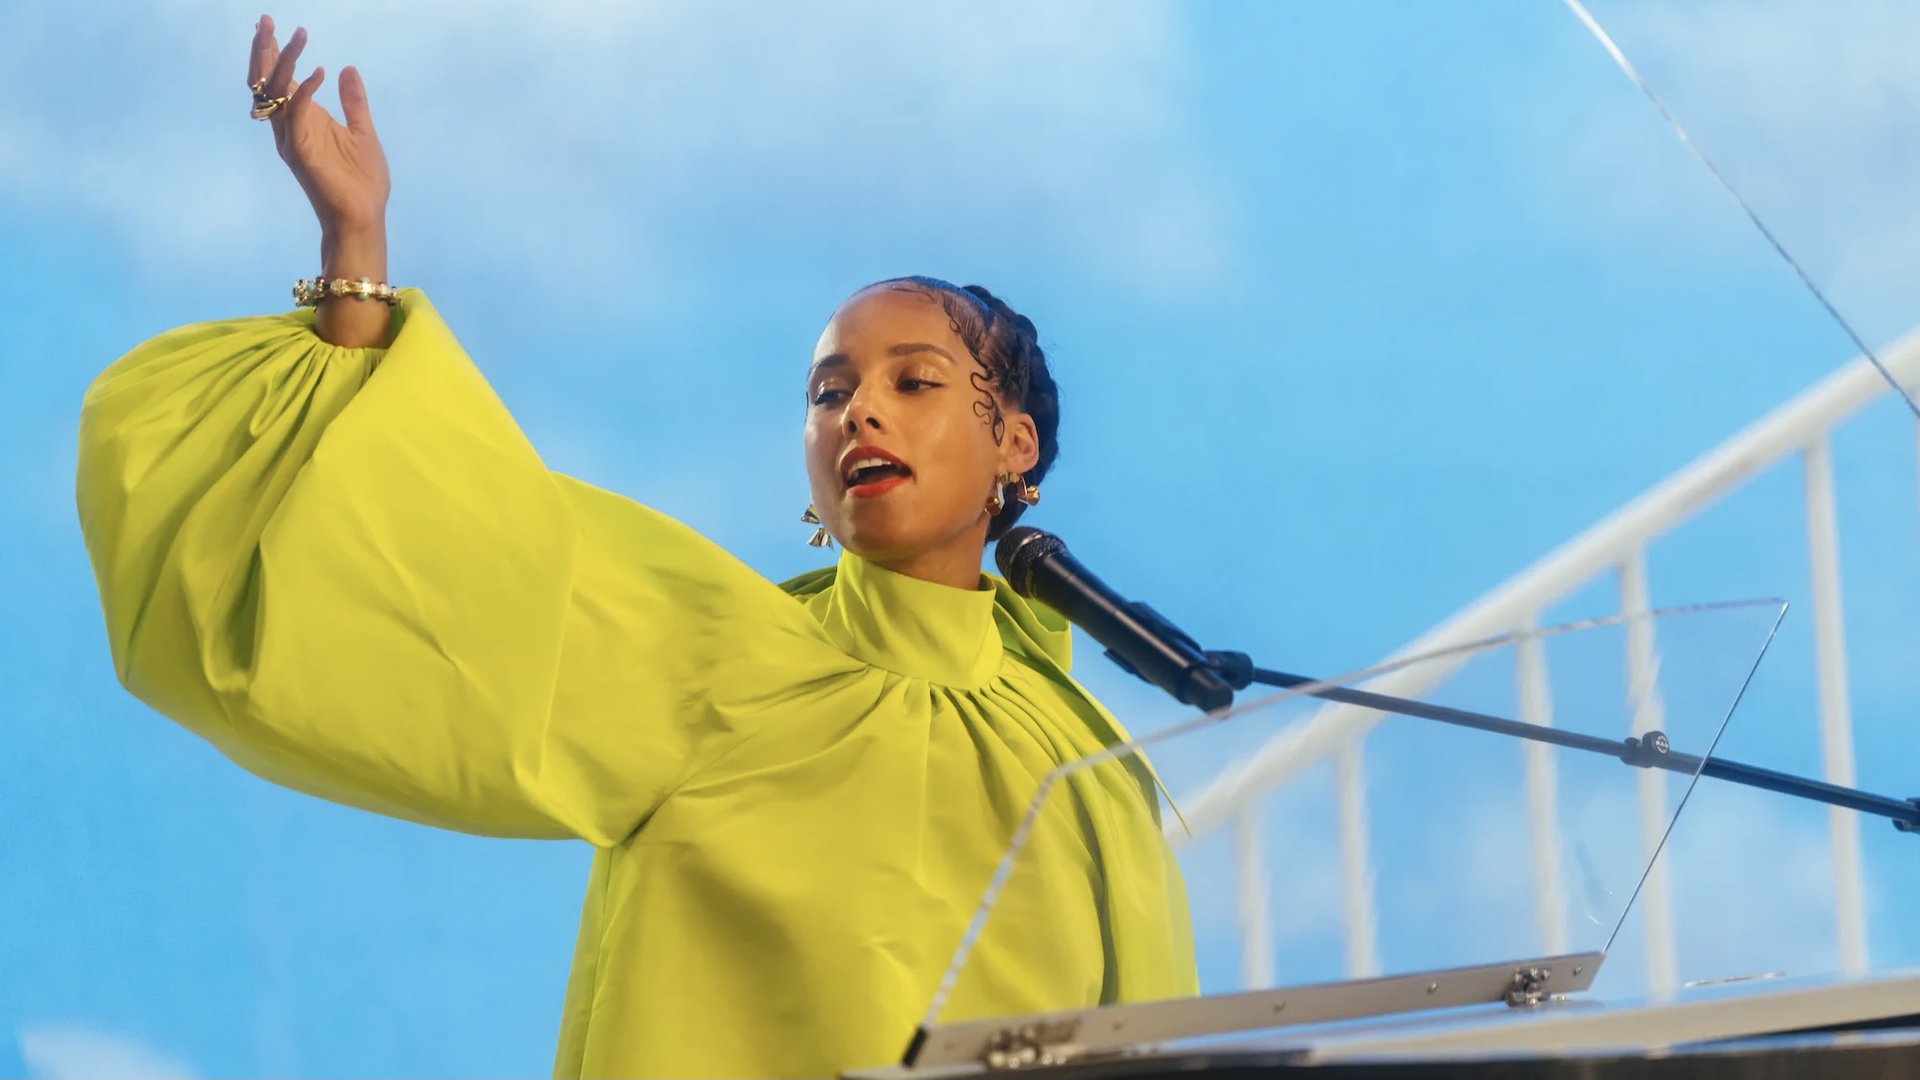 Alicia Keys waves from a piano in Noted: Alicia Keys the Untold Stories